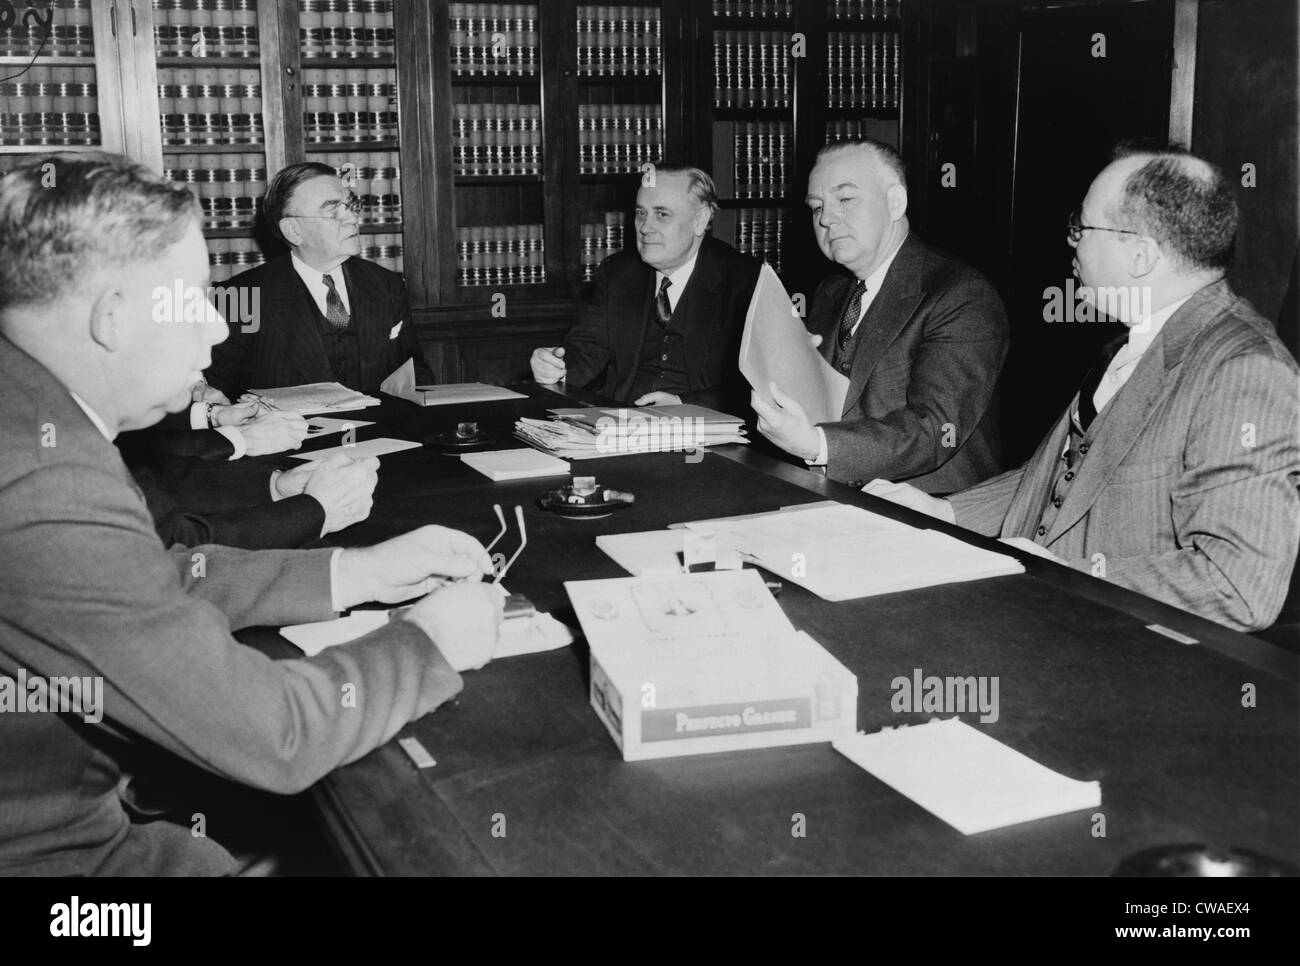 Byron Price (1891-1981), director of  Censorship for the United States  during World War II, seated with members of Senate Stock Photo